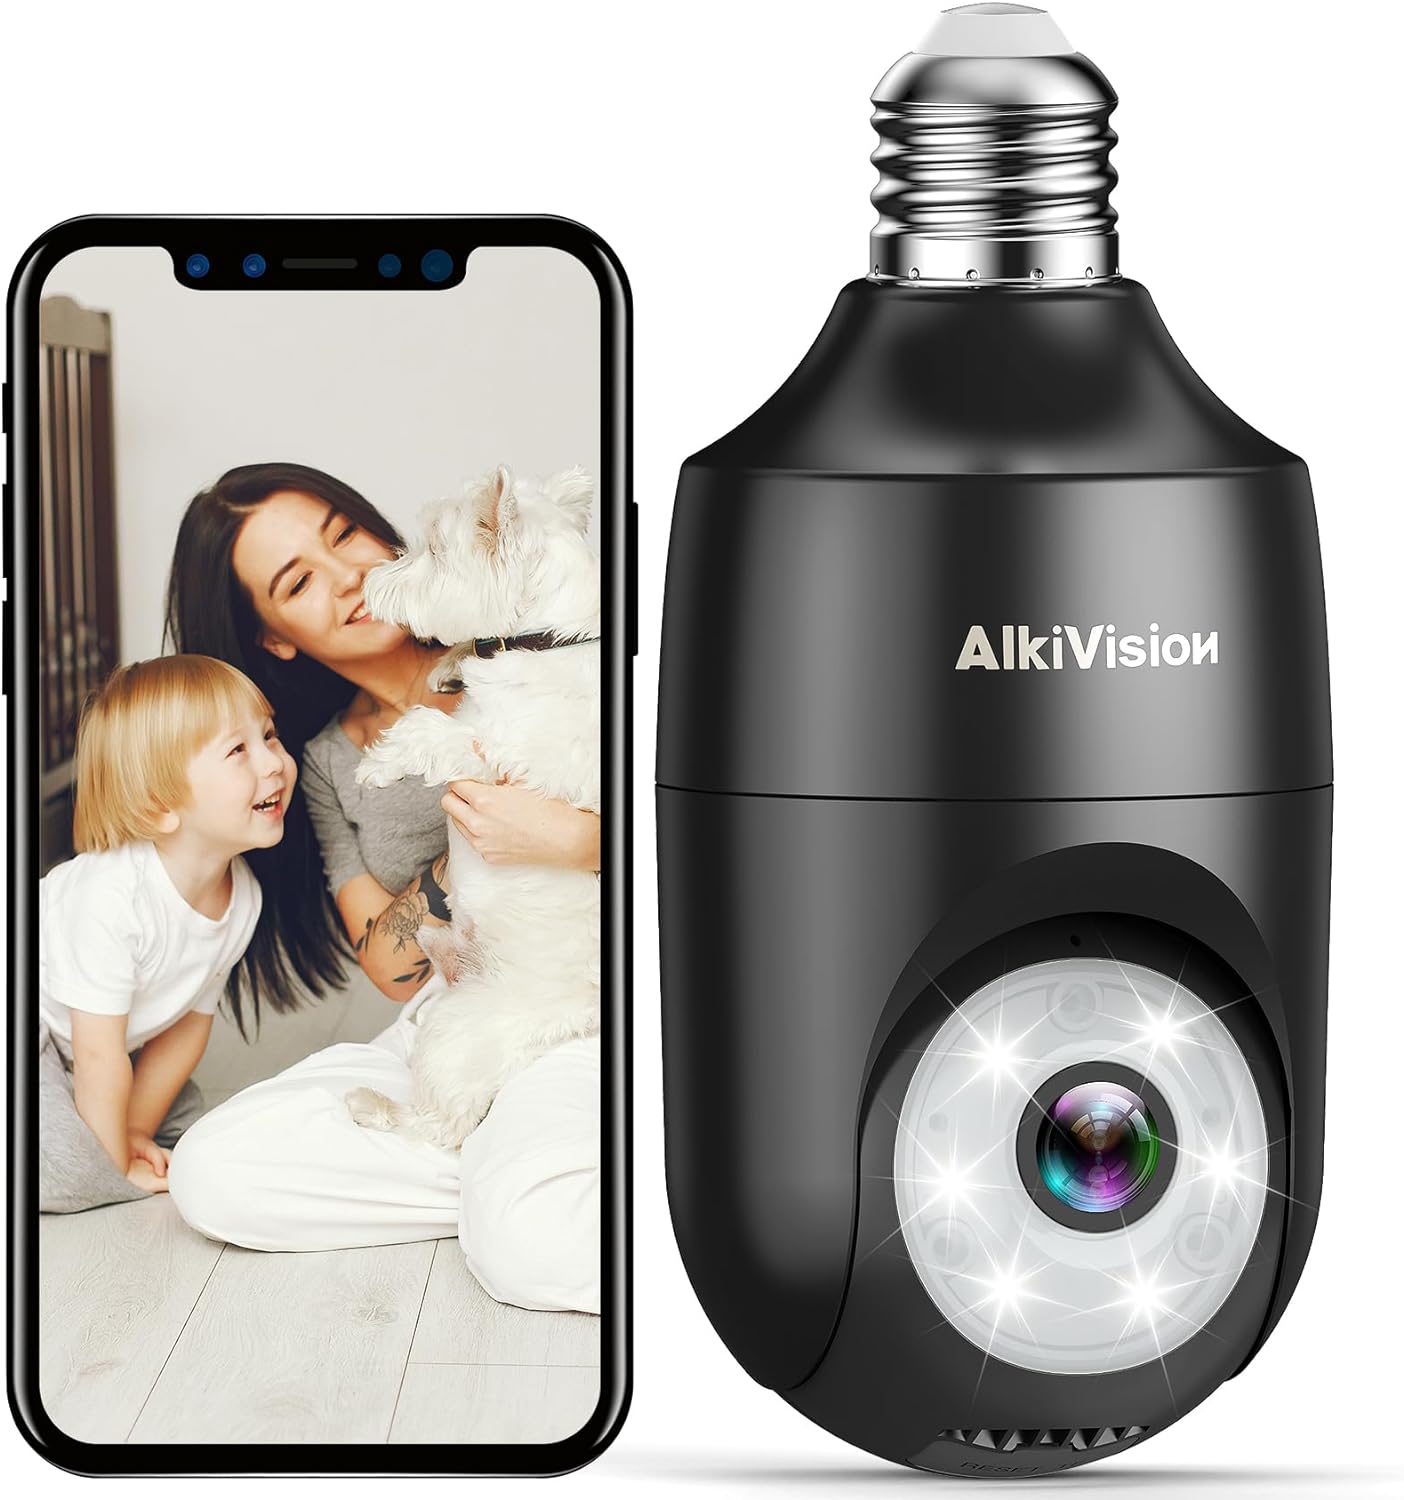 Limited-Time Discounts! AlkiVision 2K Light Bulb Security Camera - Save 80% Now